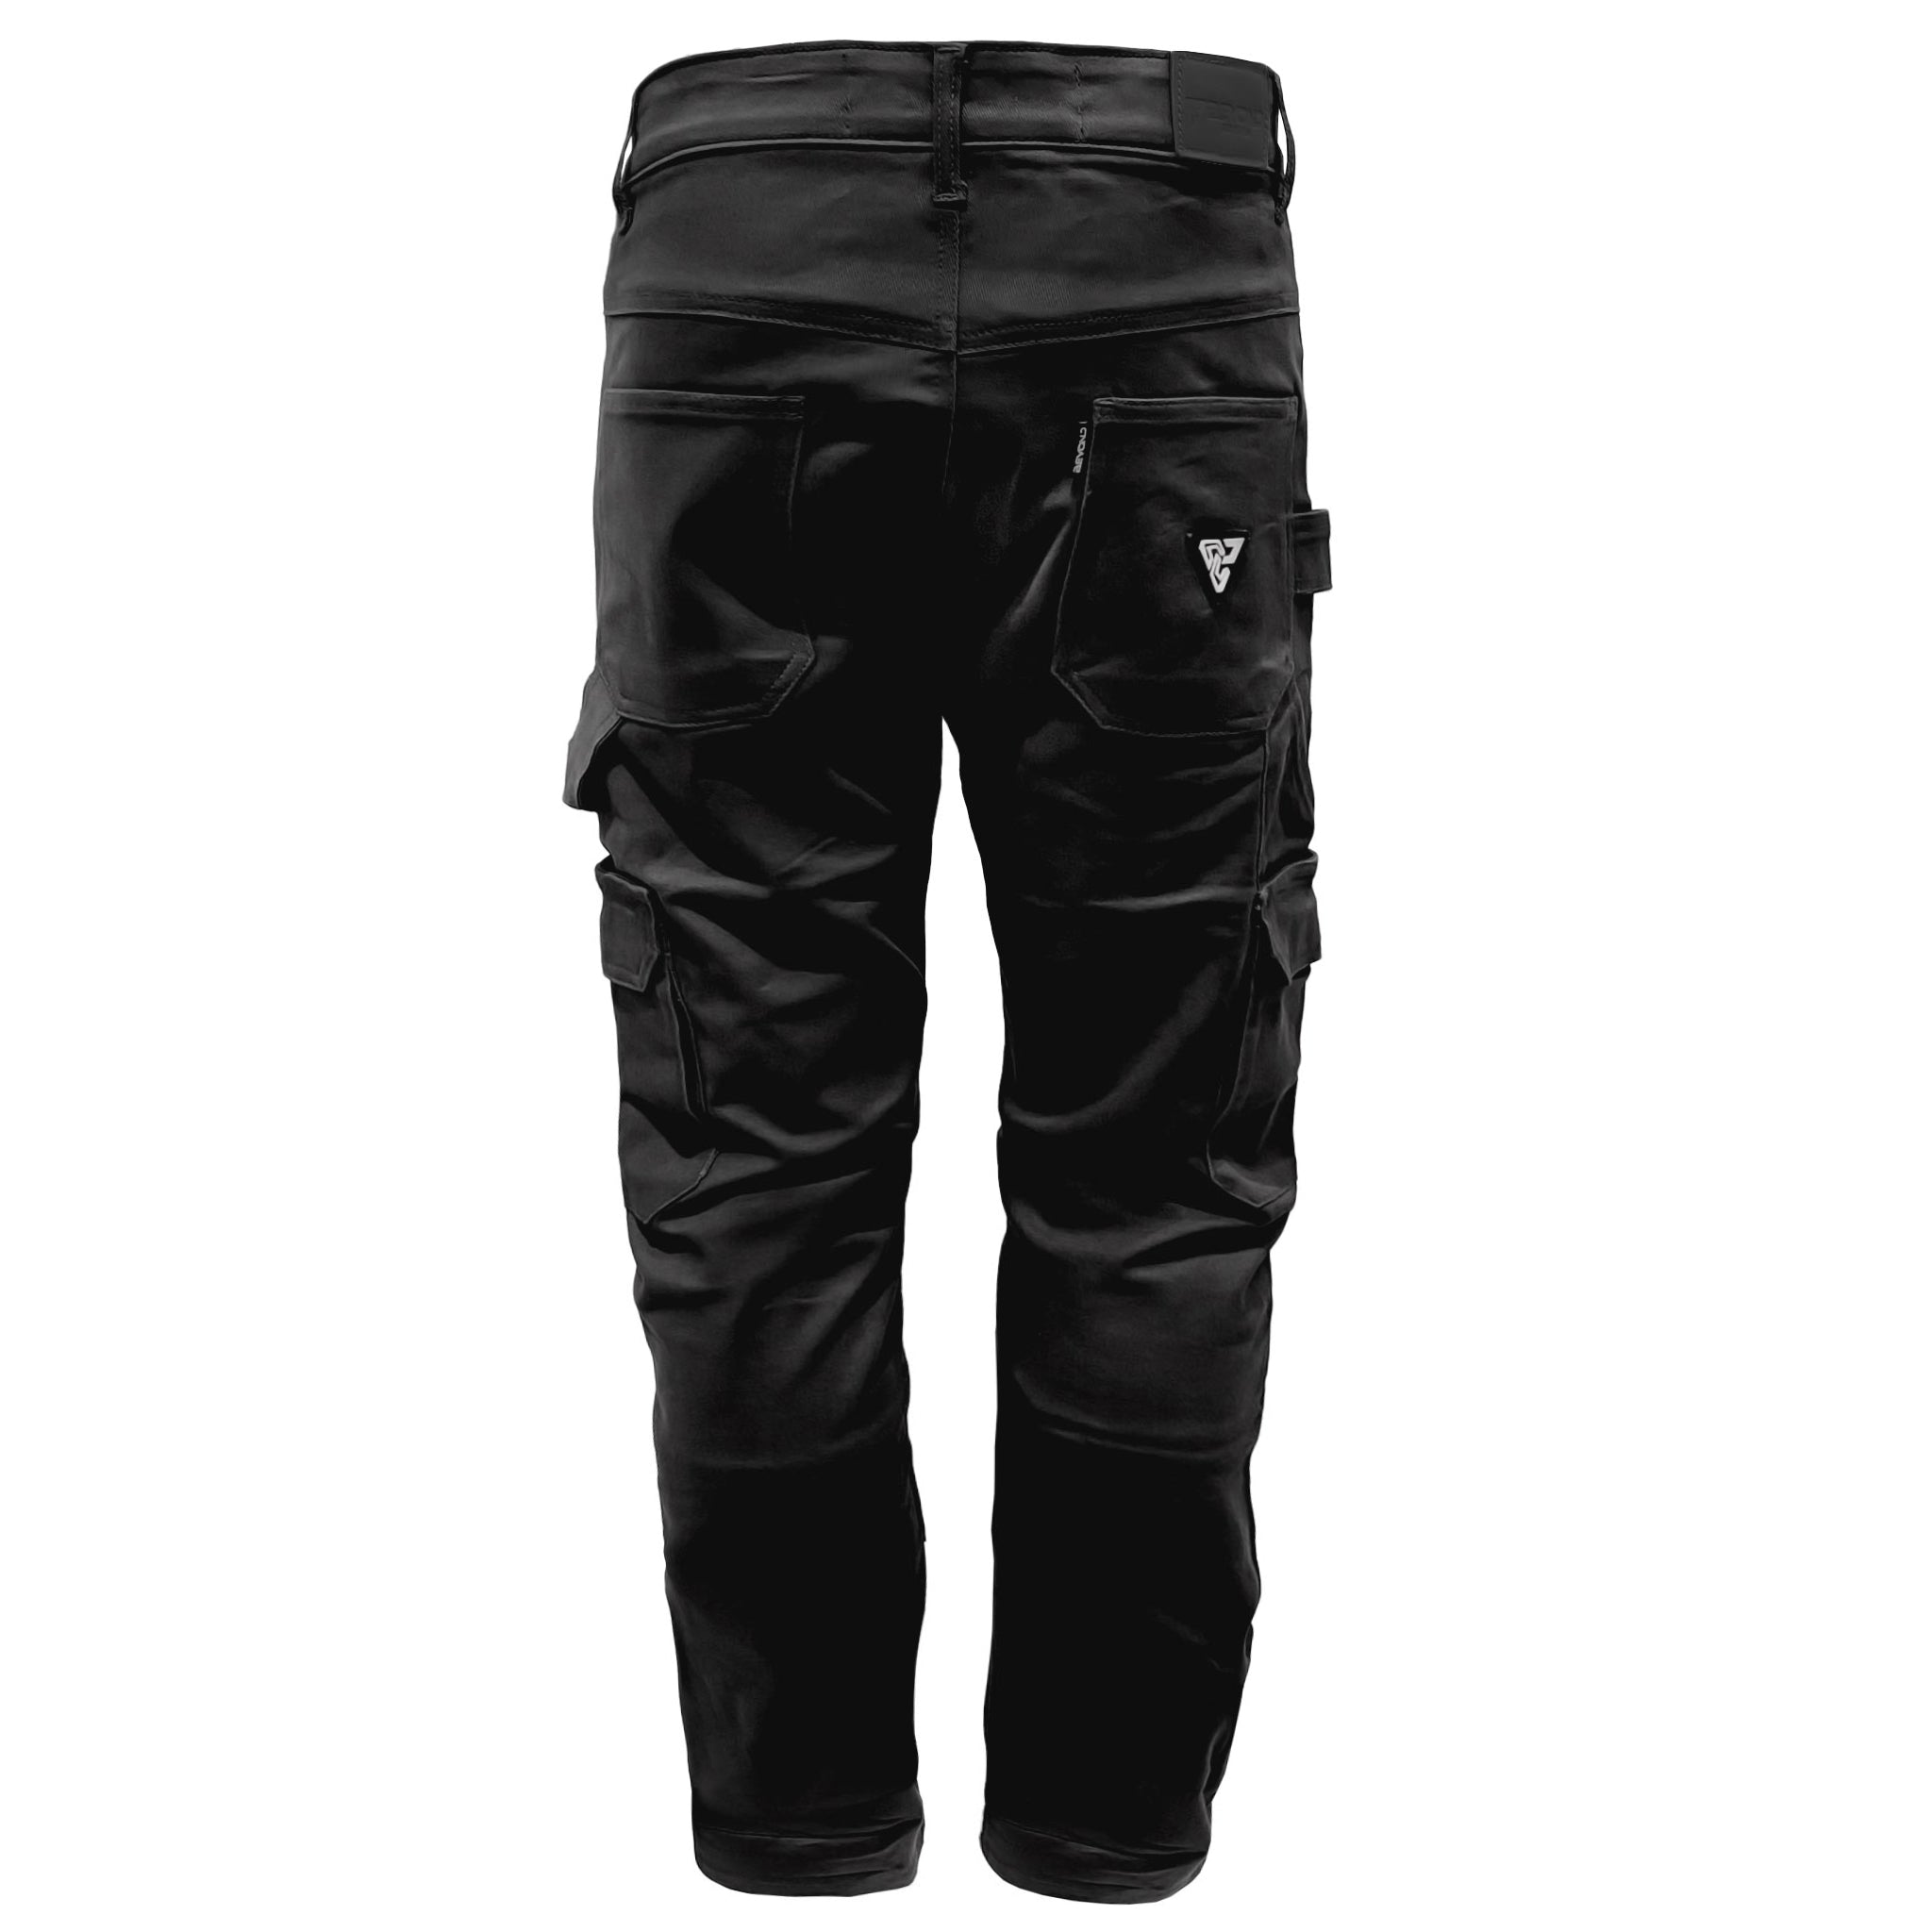 Loose Fit Cargo Pants - Black with Pads